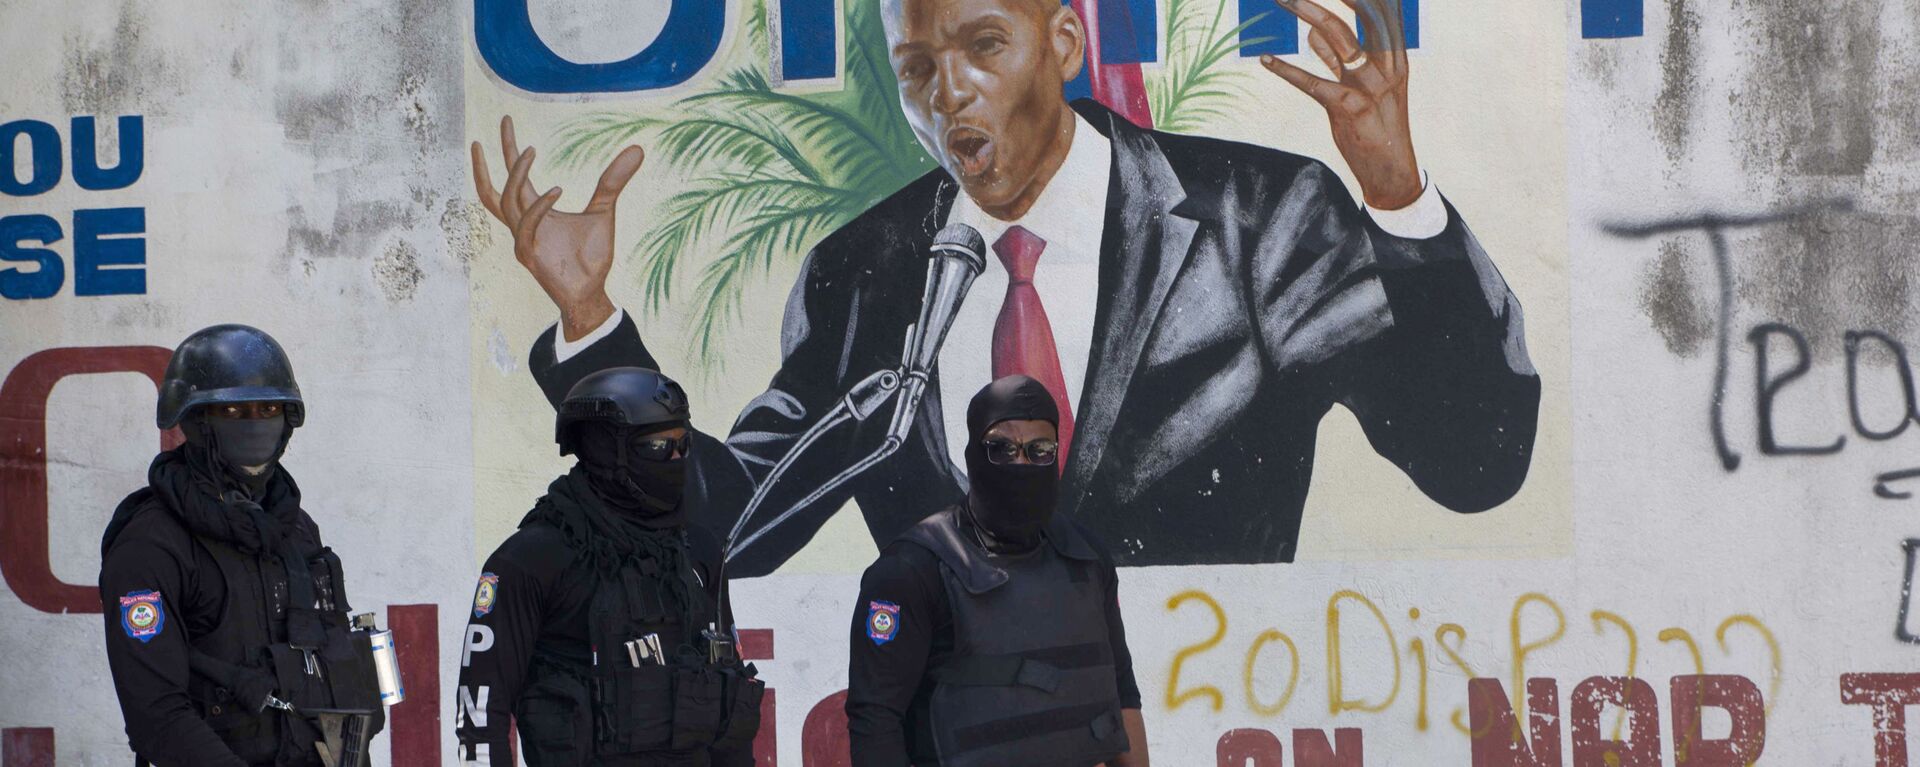 Police stand near a mural featuring Haitian President Jovenel Moise, near the leader’s residence where he was killed by gunmen in the early morning hours in Port-au-Prince, Haiti, Wednesday, July 7, 2021. - Sputnik International, 1920, 08.07.2021